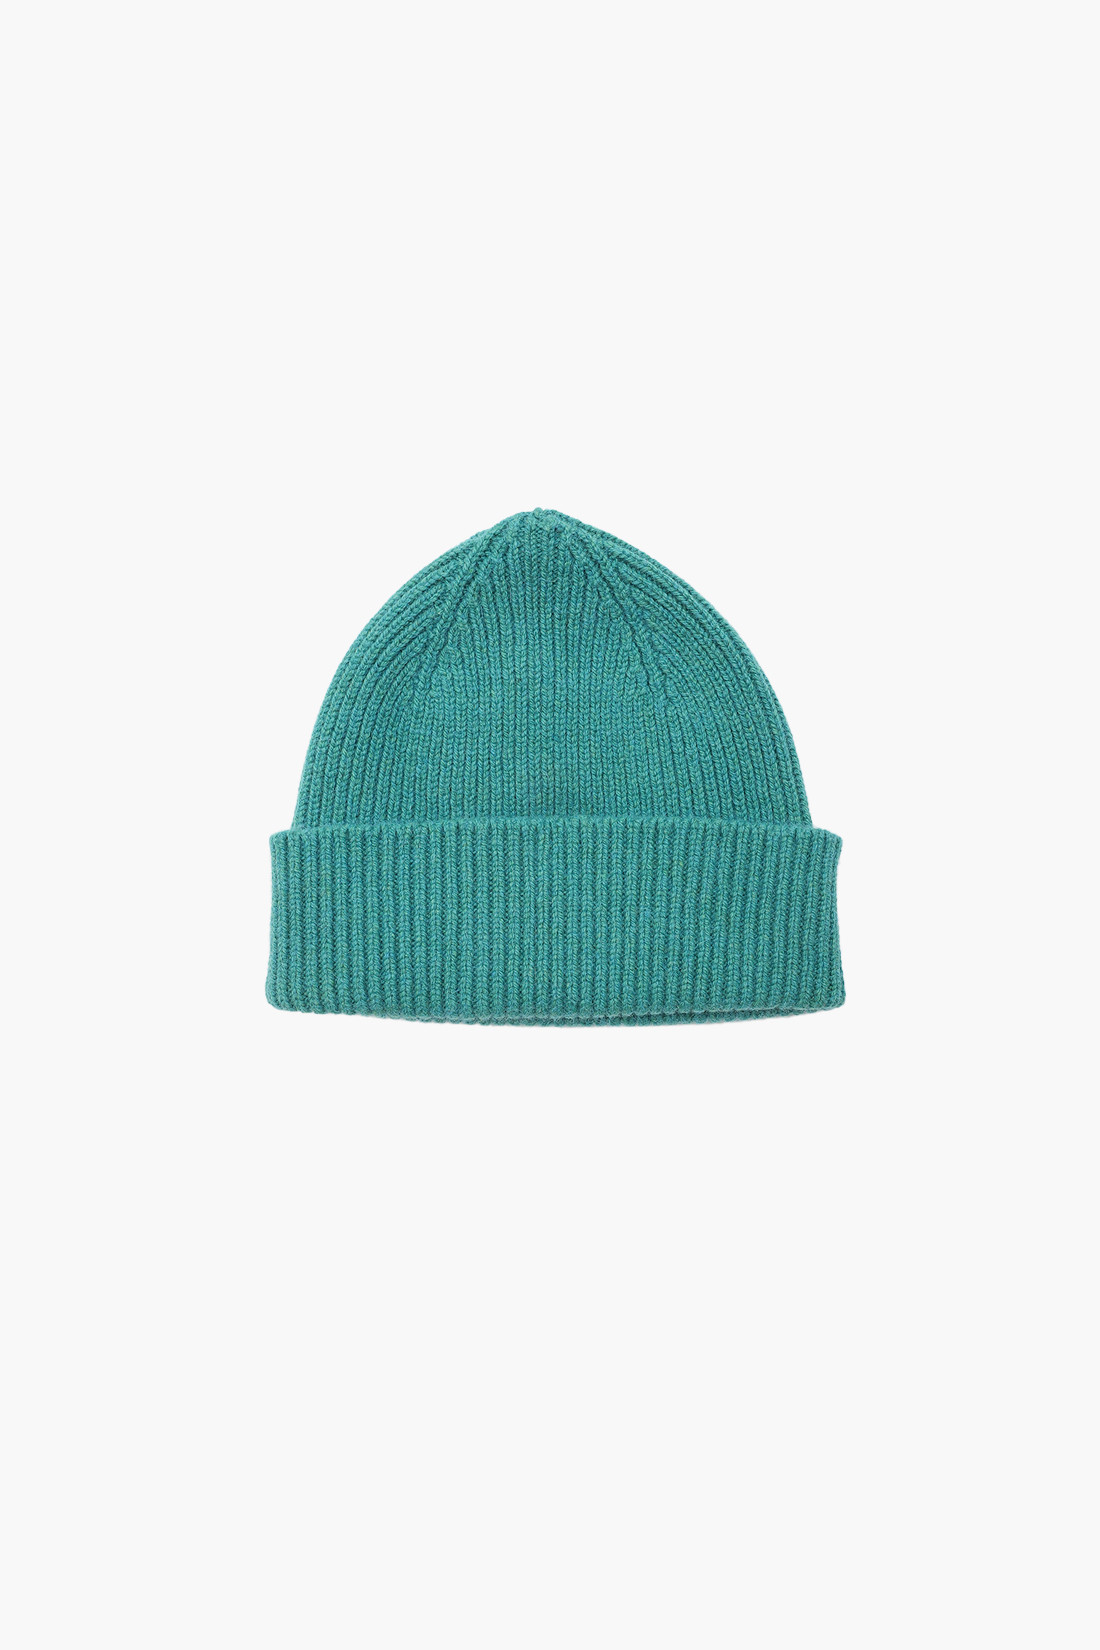 Barra hat Chive